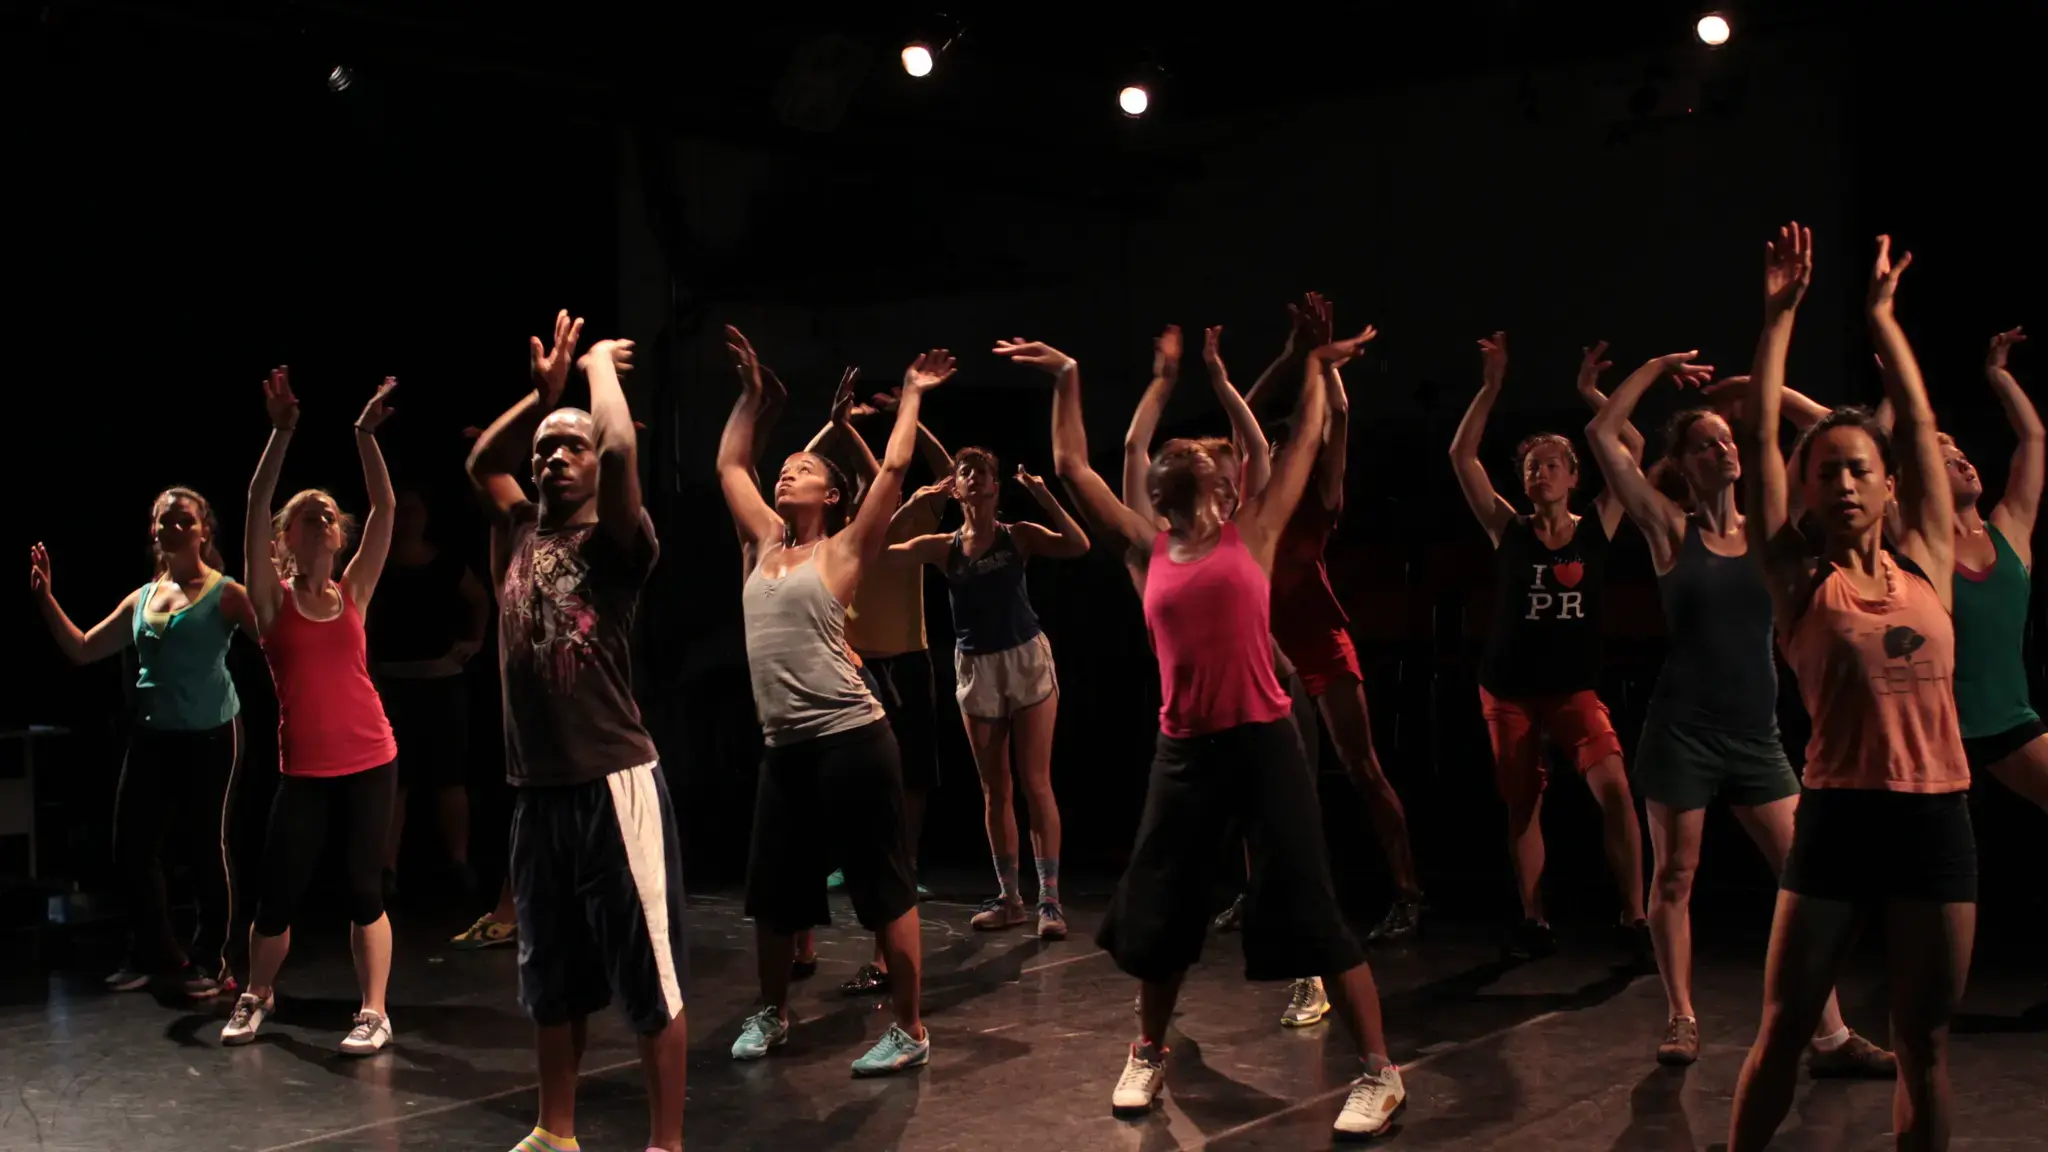 Dancers rehearsing J-Sette with LaKendrick Davis and Donte Beacham. Image courtesy of idiosynCrazy productions.